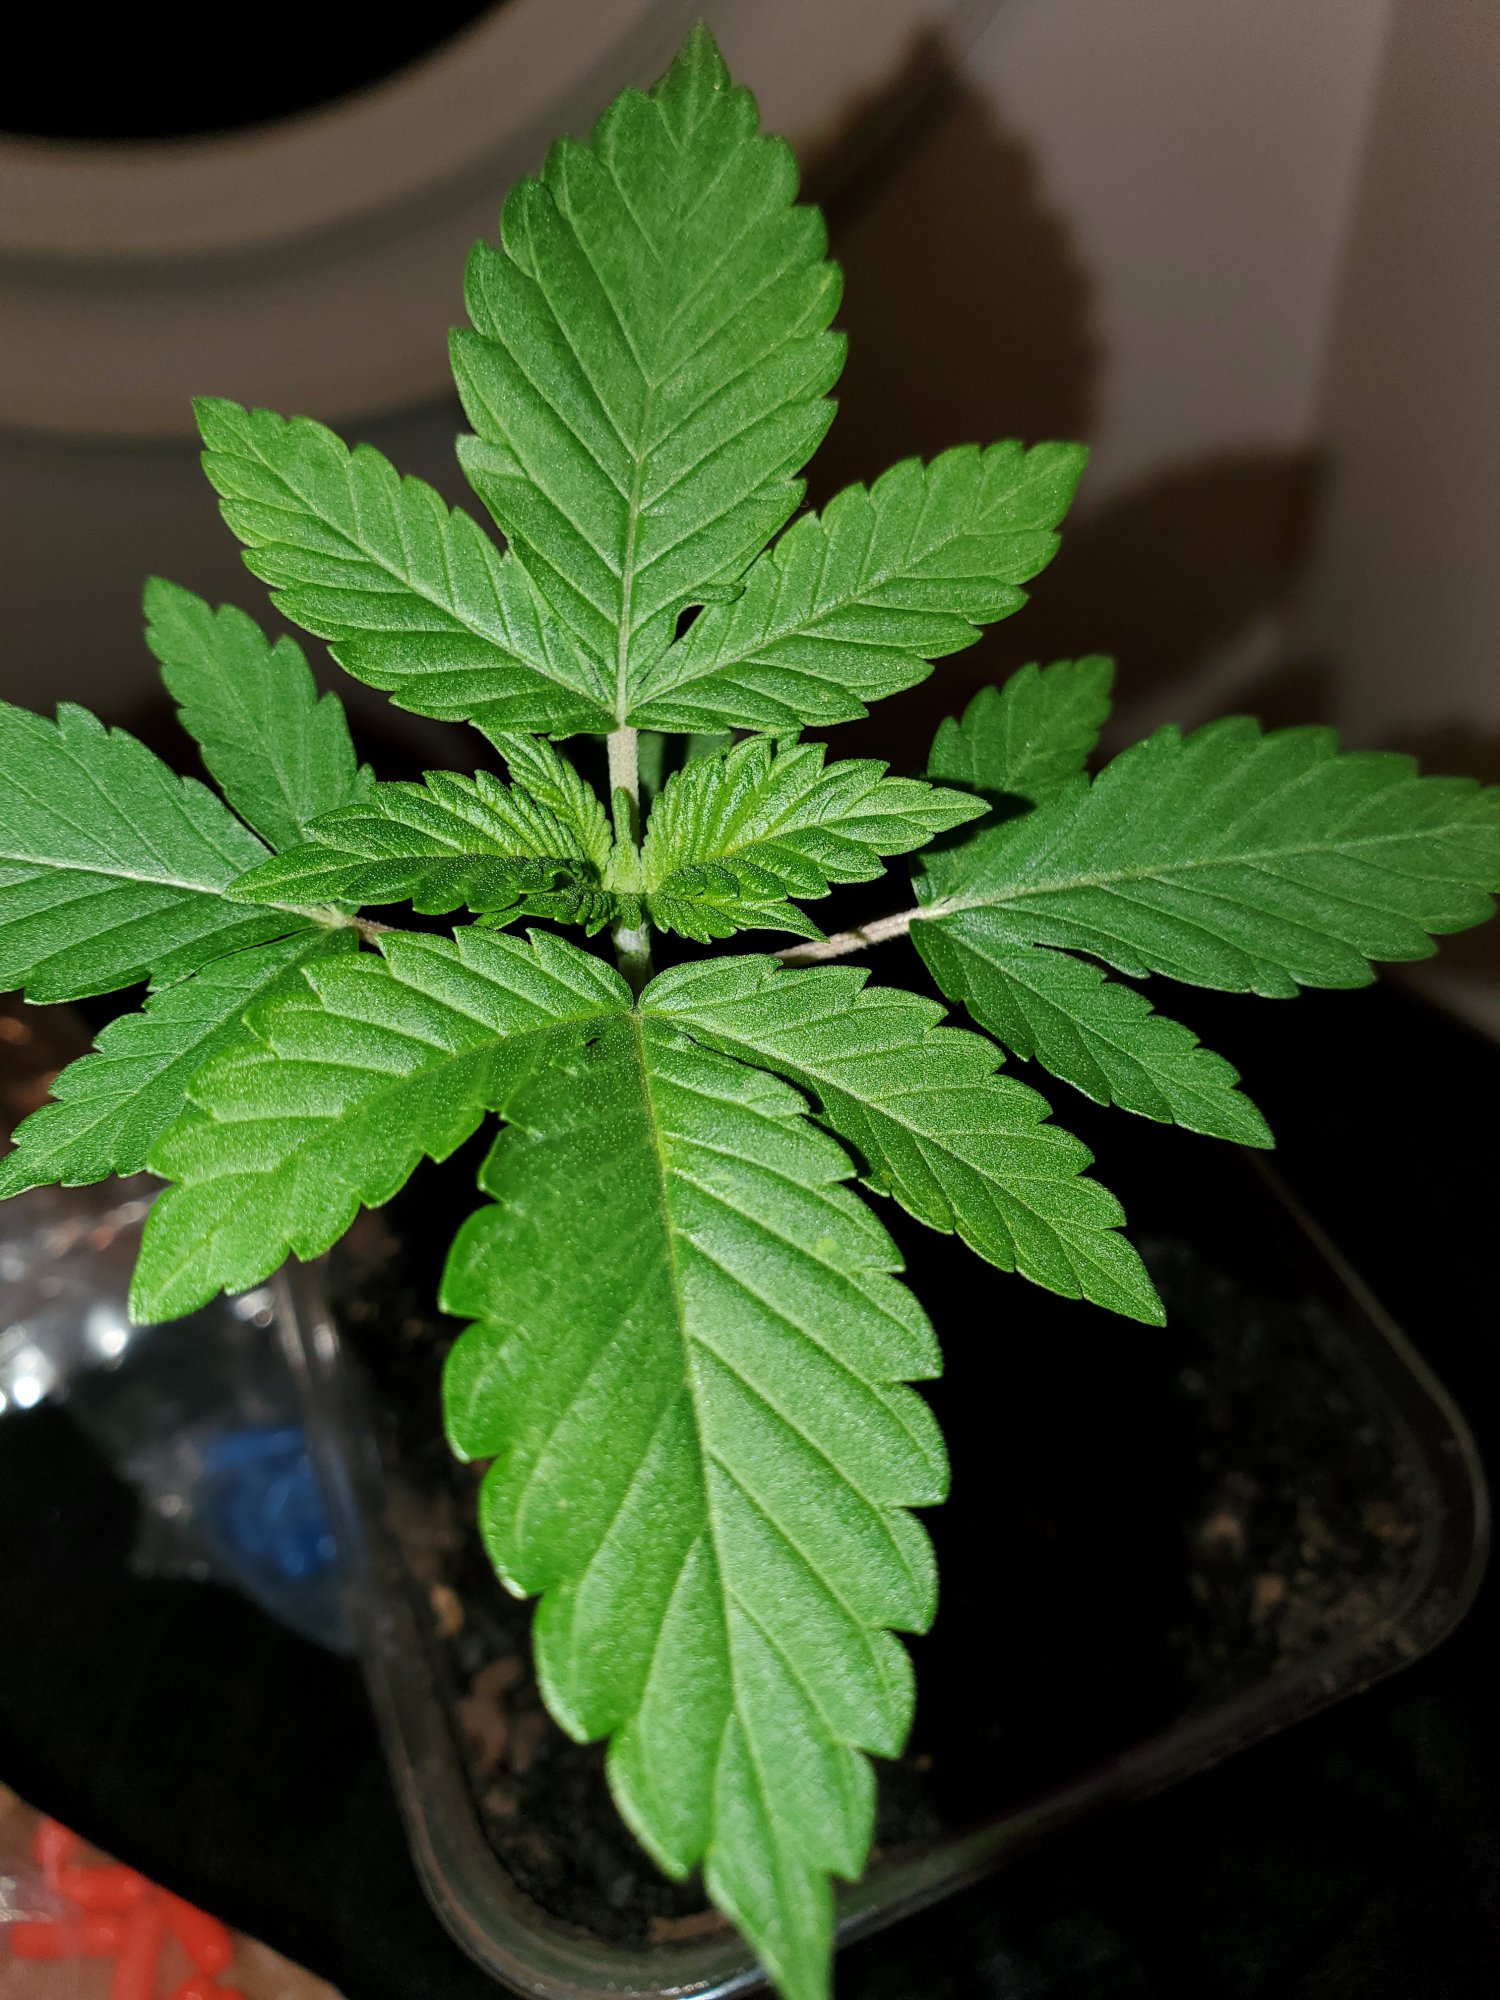 Wrinkled leaves   looking for advice